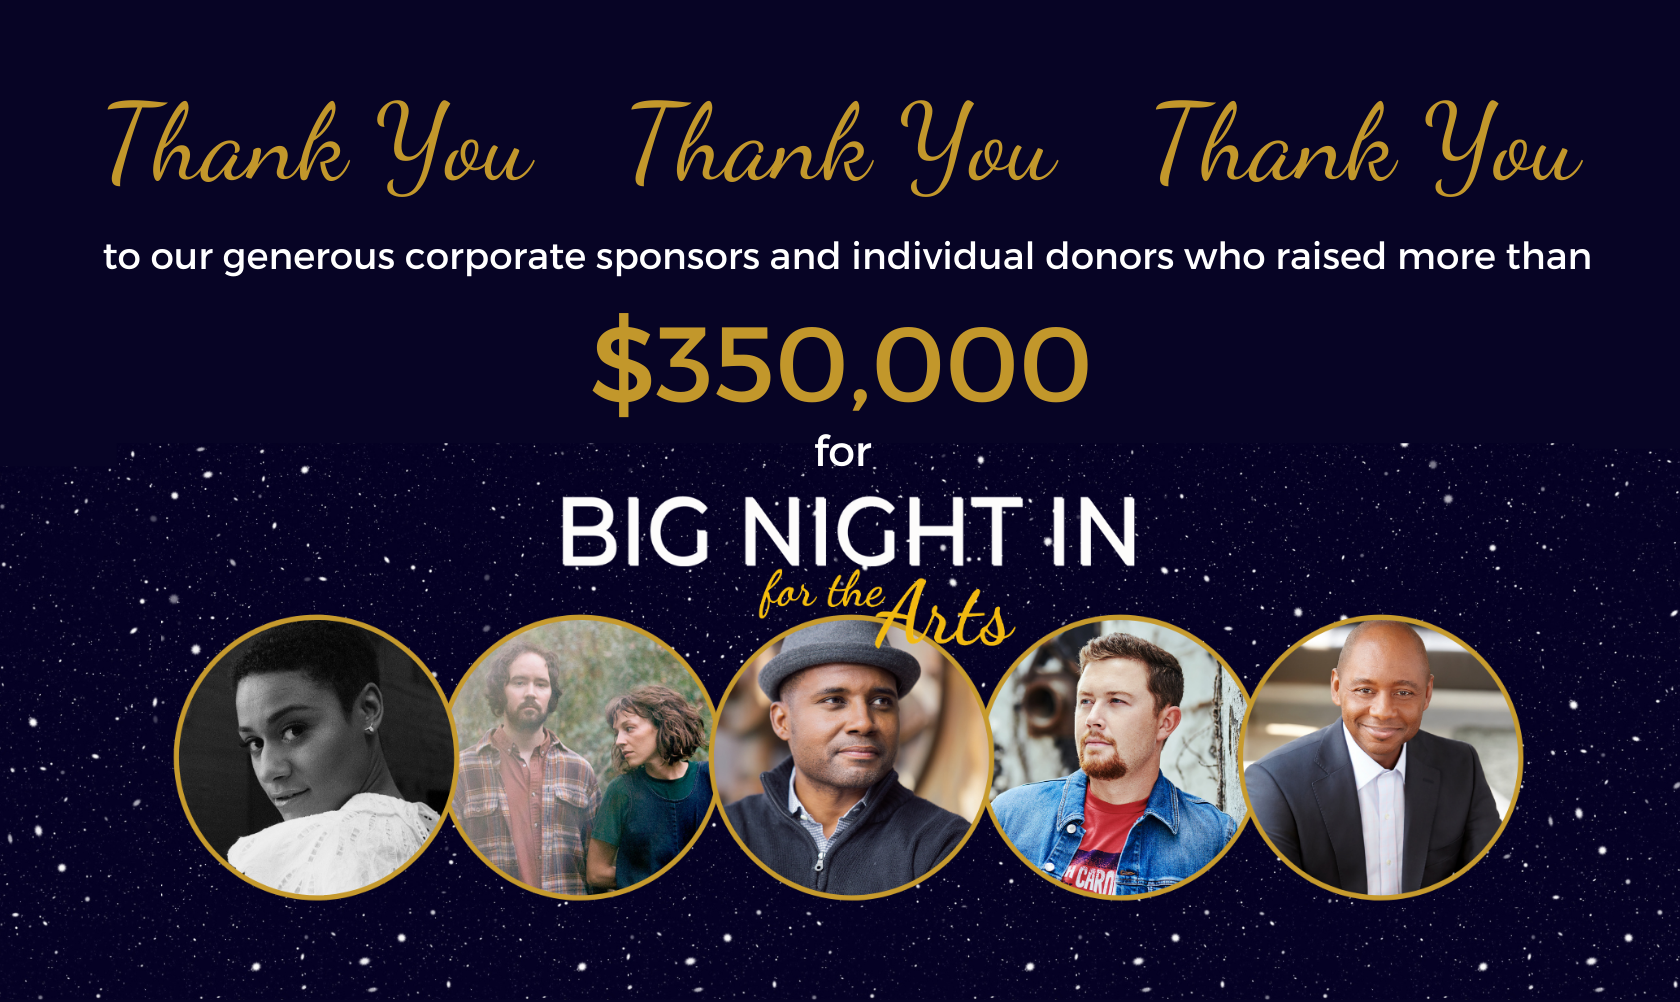 Thank You to our Big Night In Supporters who raised over $350,000